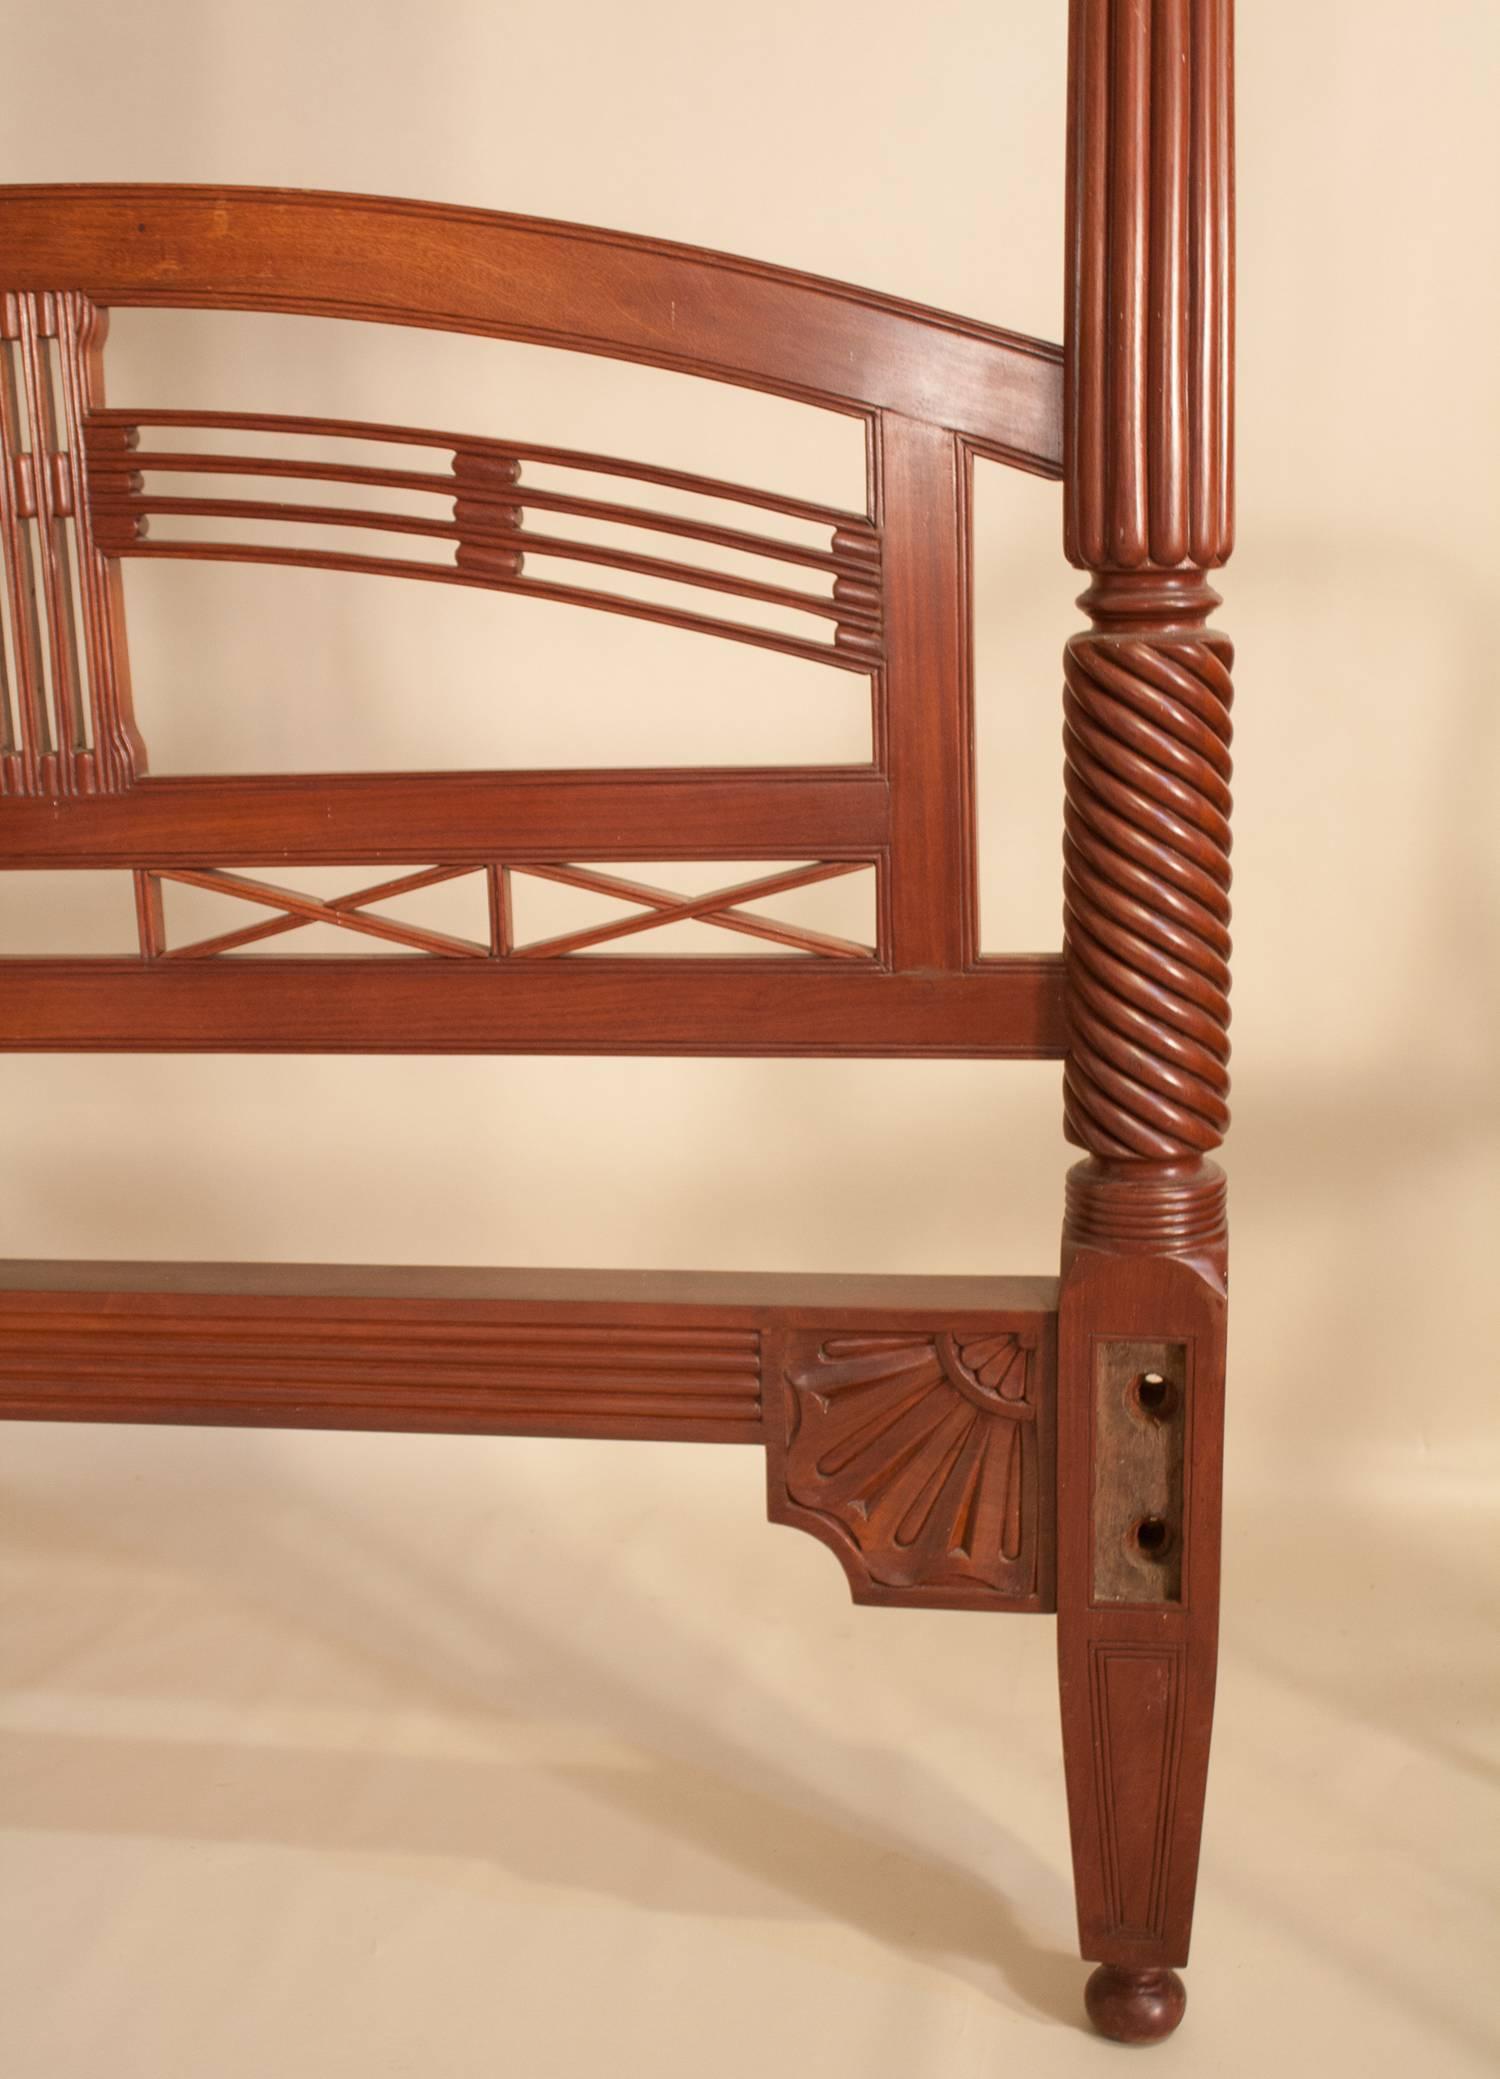 Indian Four Post Mahogany Canopy Bed from British India